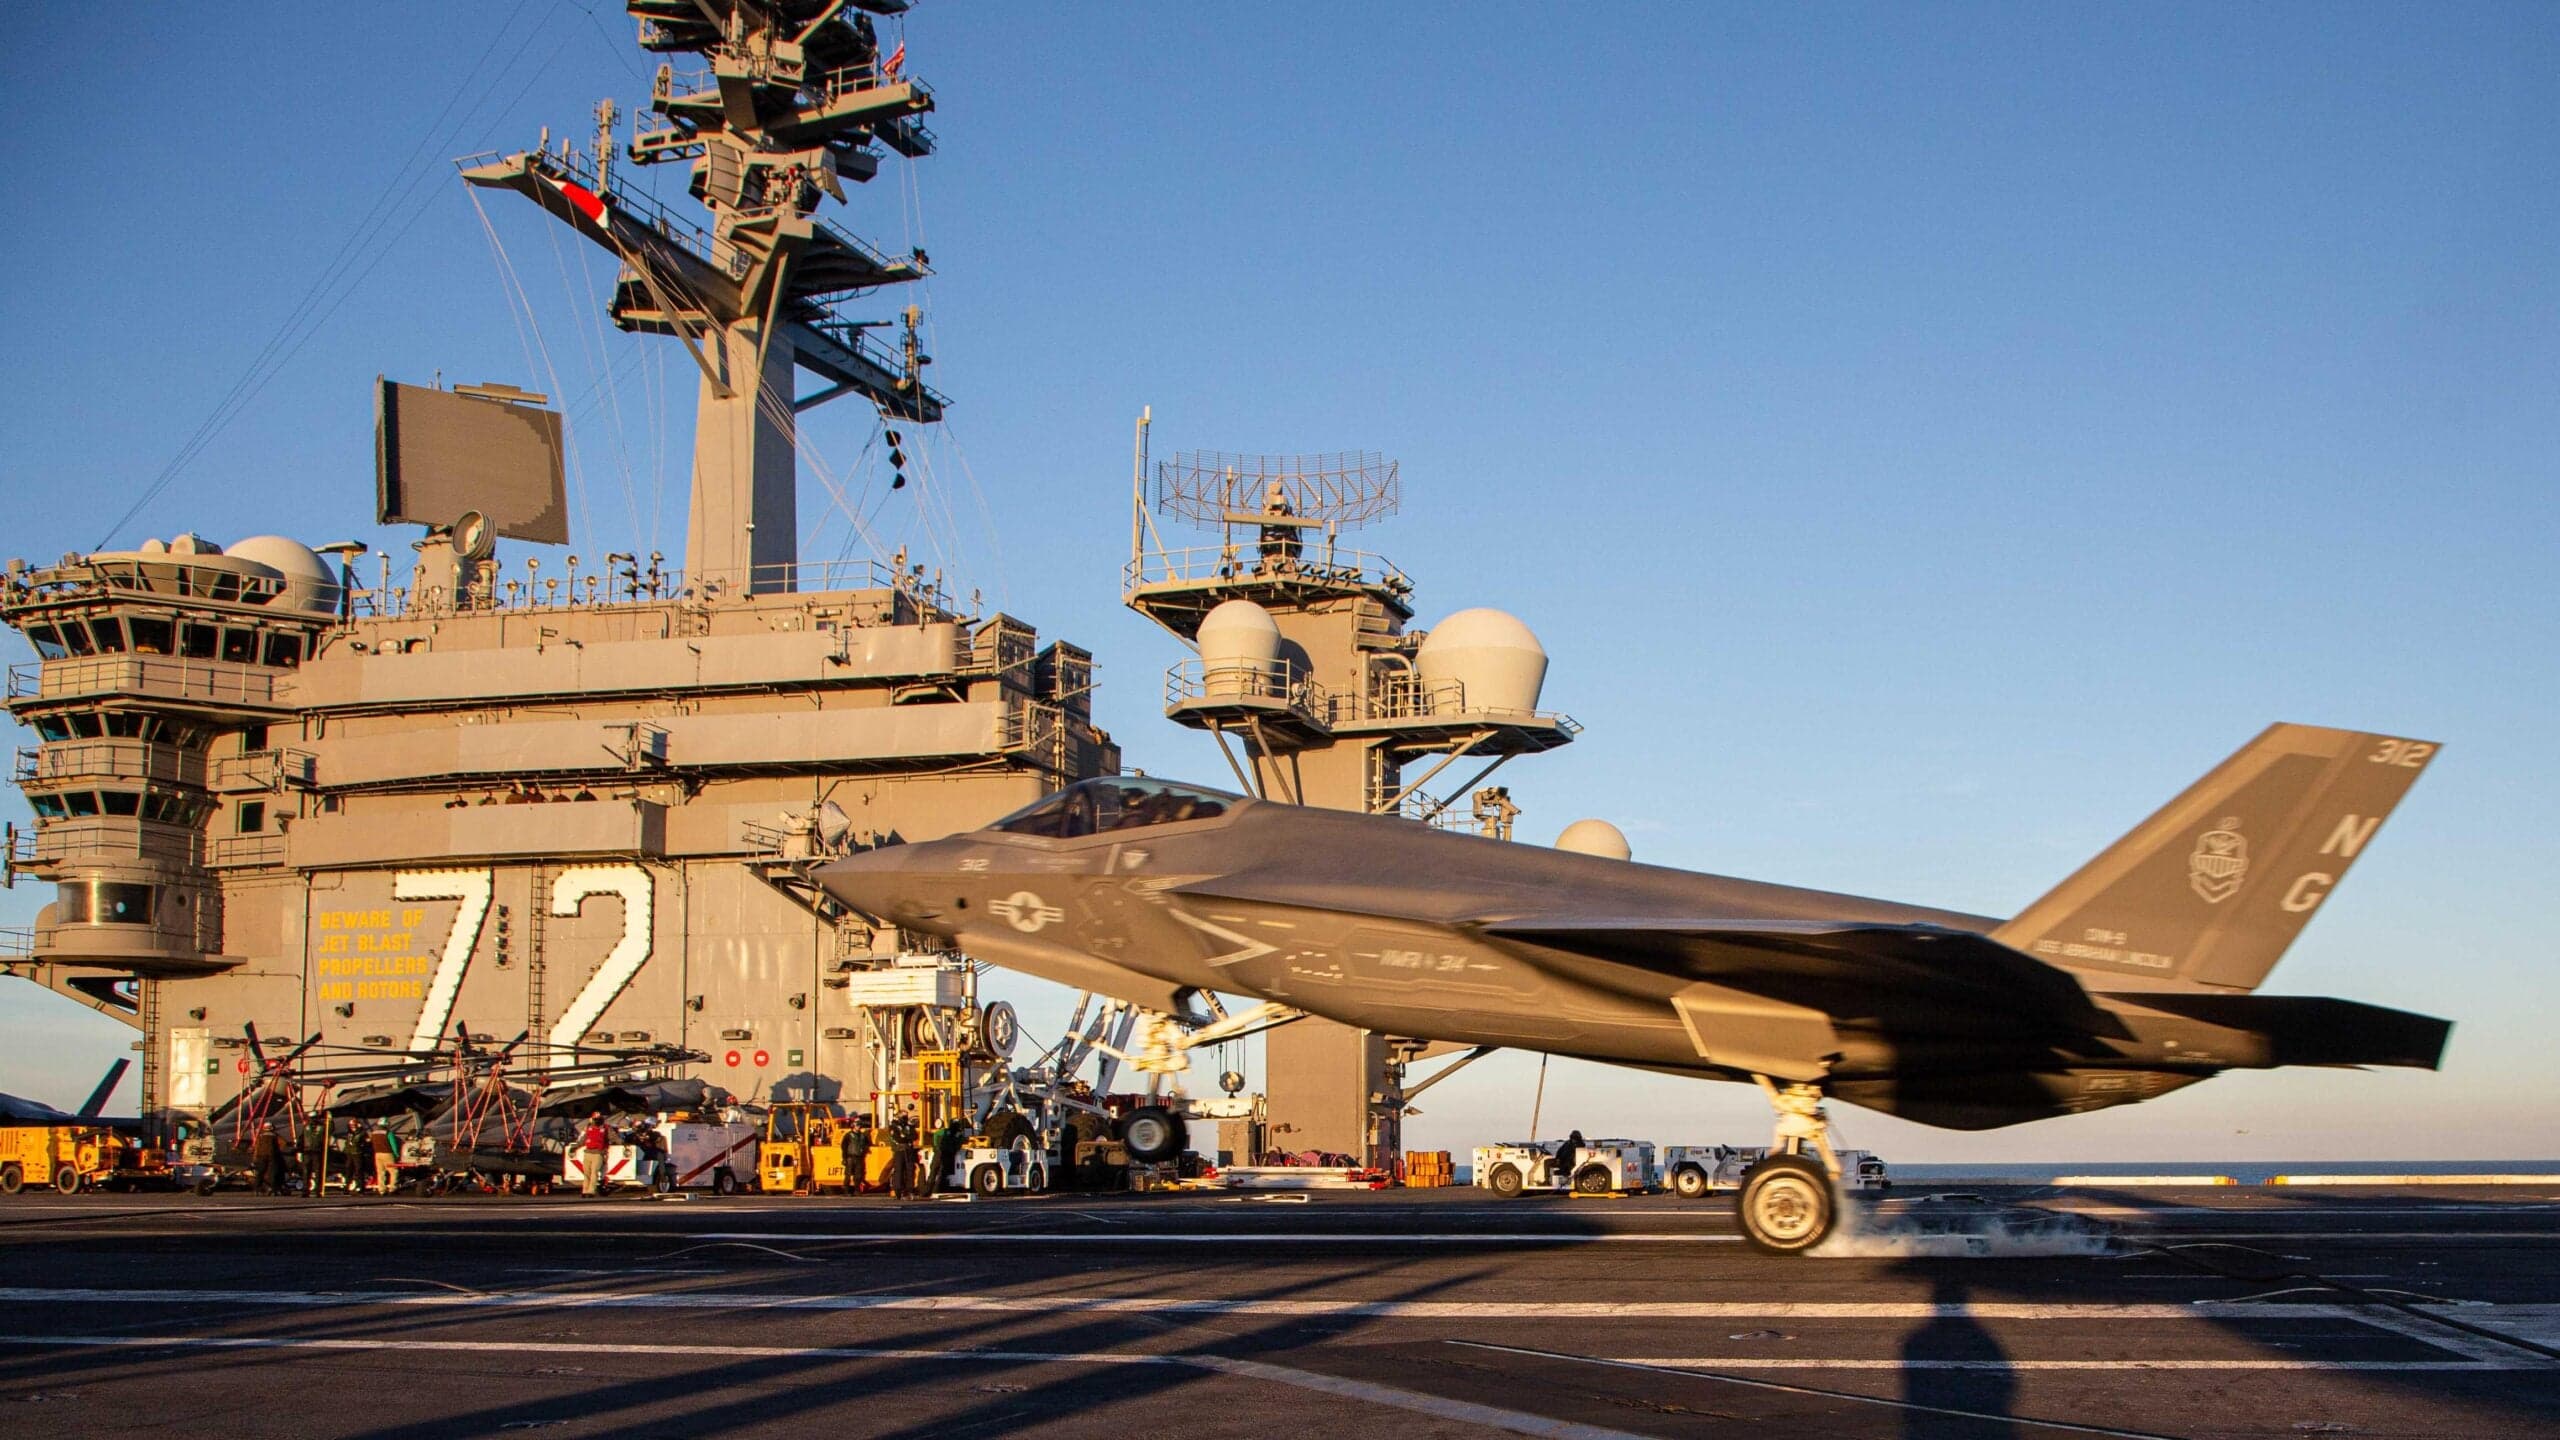 Marine F-35Cs Begin First Carrier Deployment, Type Could Take On Larger Role In The Service